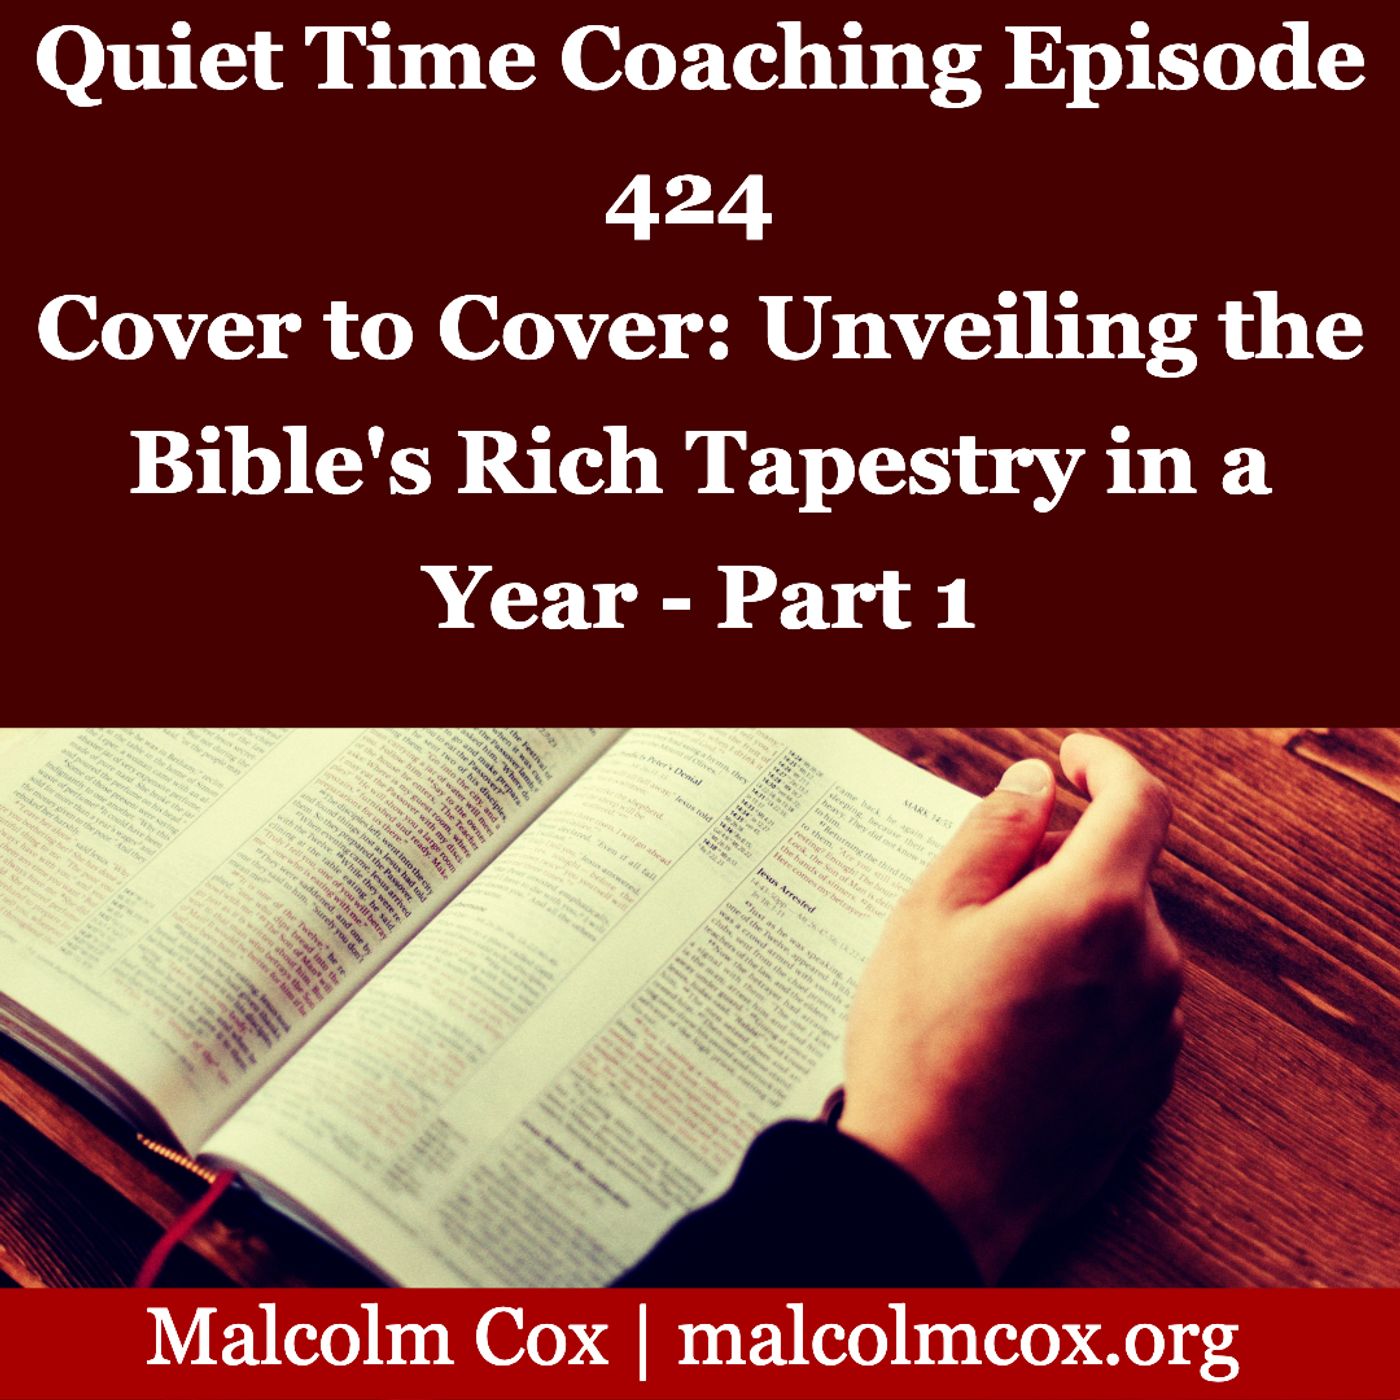 S2 Ep424: Quiet Time Coaching Episode 424 | Cover to Cover: Unveiling the Bible's Rich Tapestry in a Year - Part 1 | Malcolm Cox